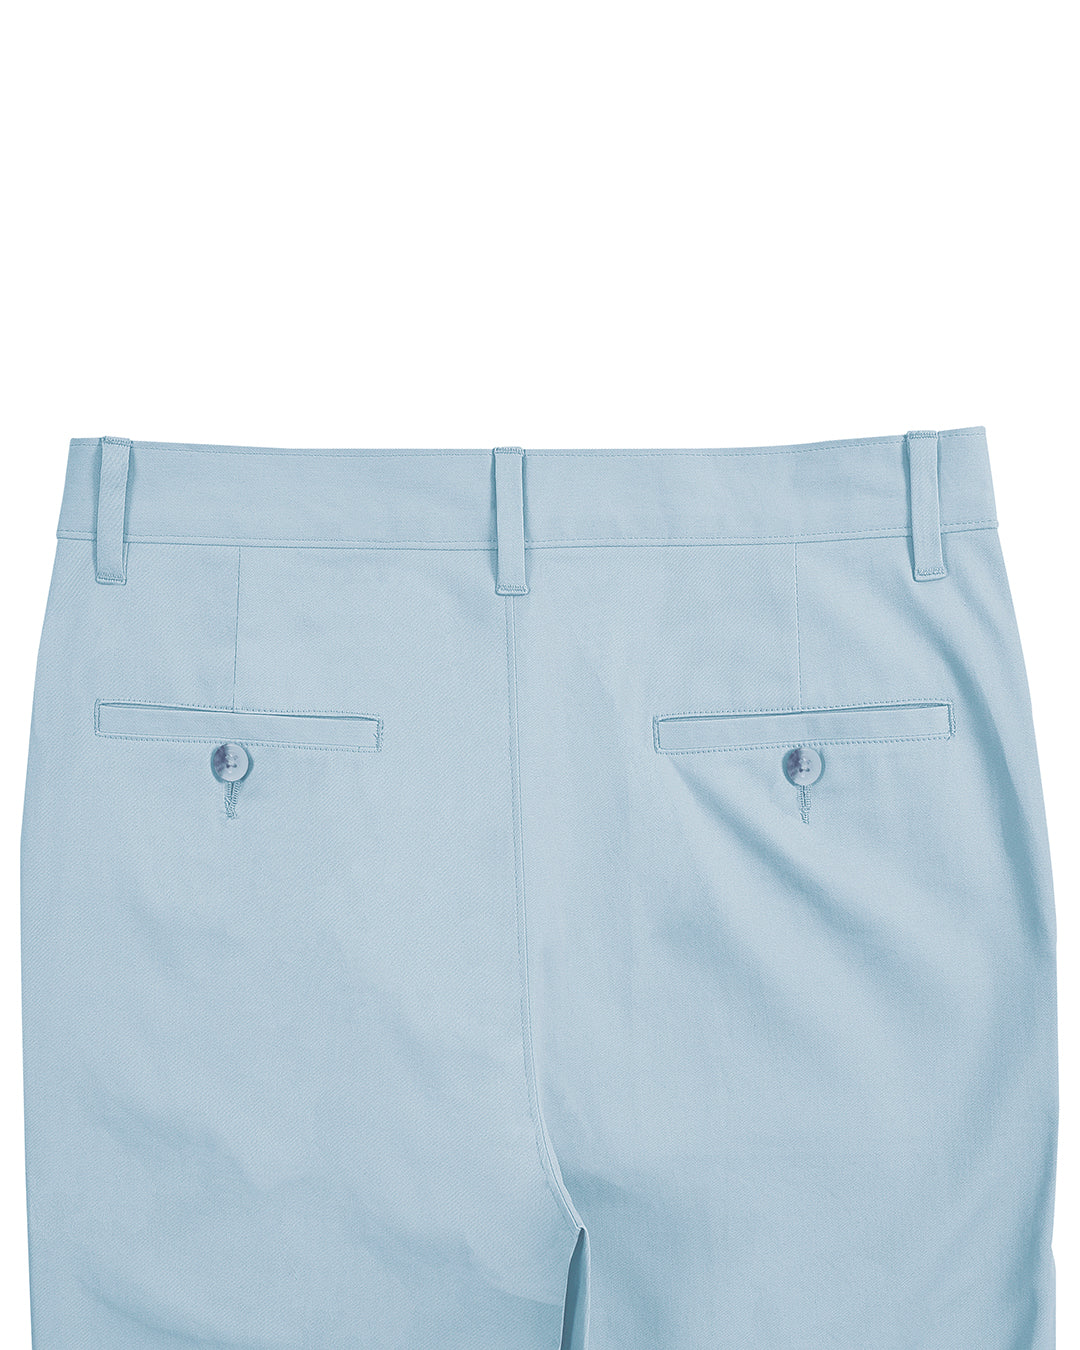 Back view of custom Genoa Chino pants for men by Luxire in powder blue